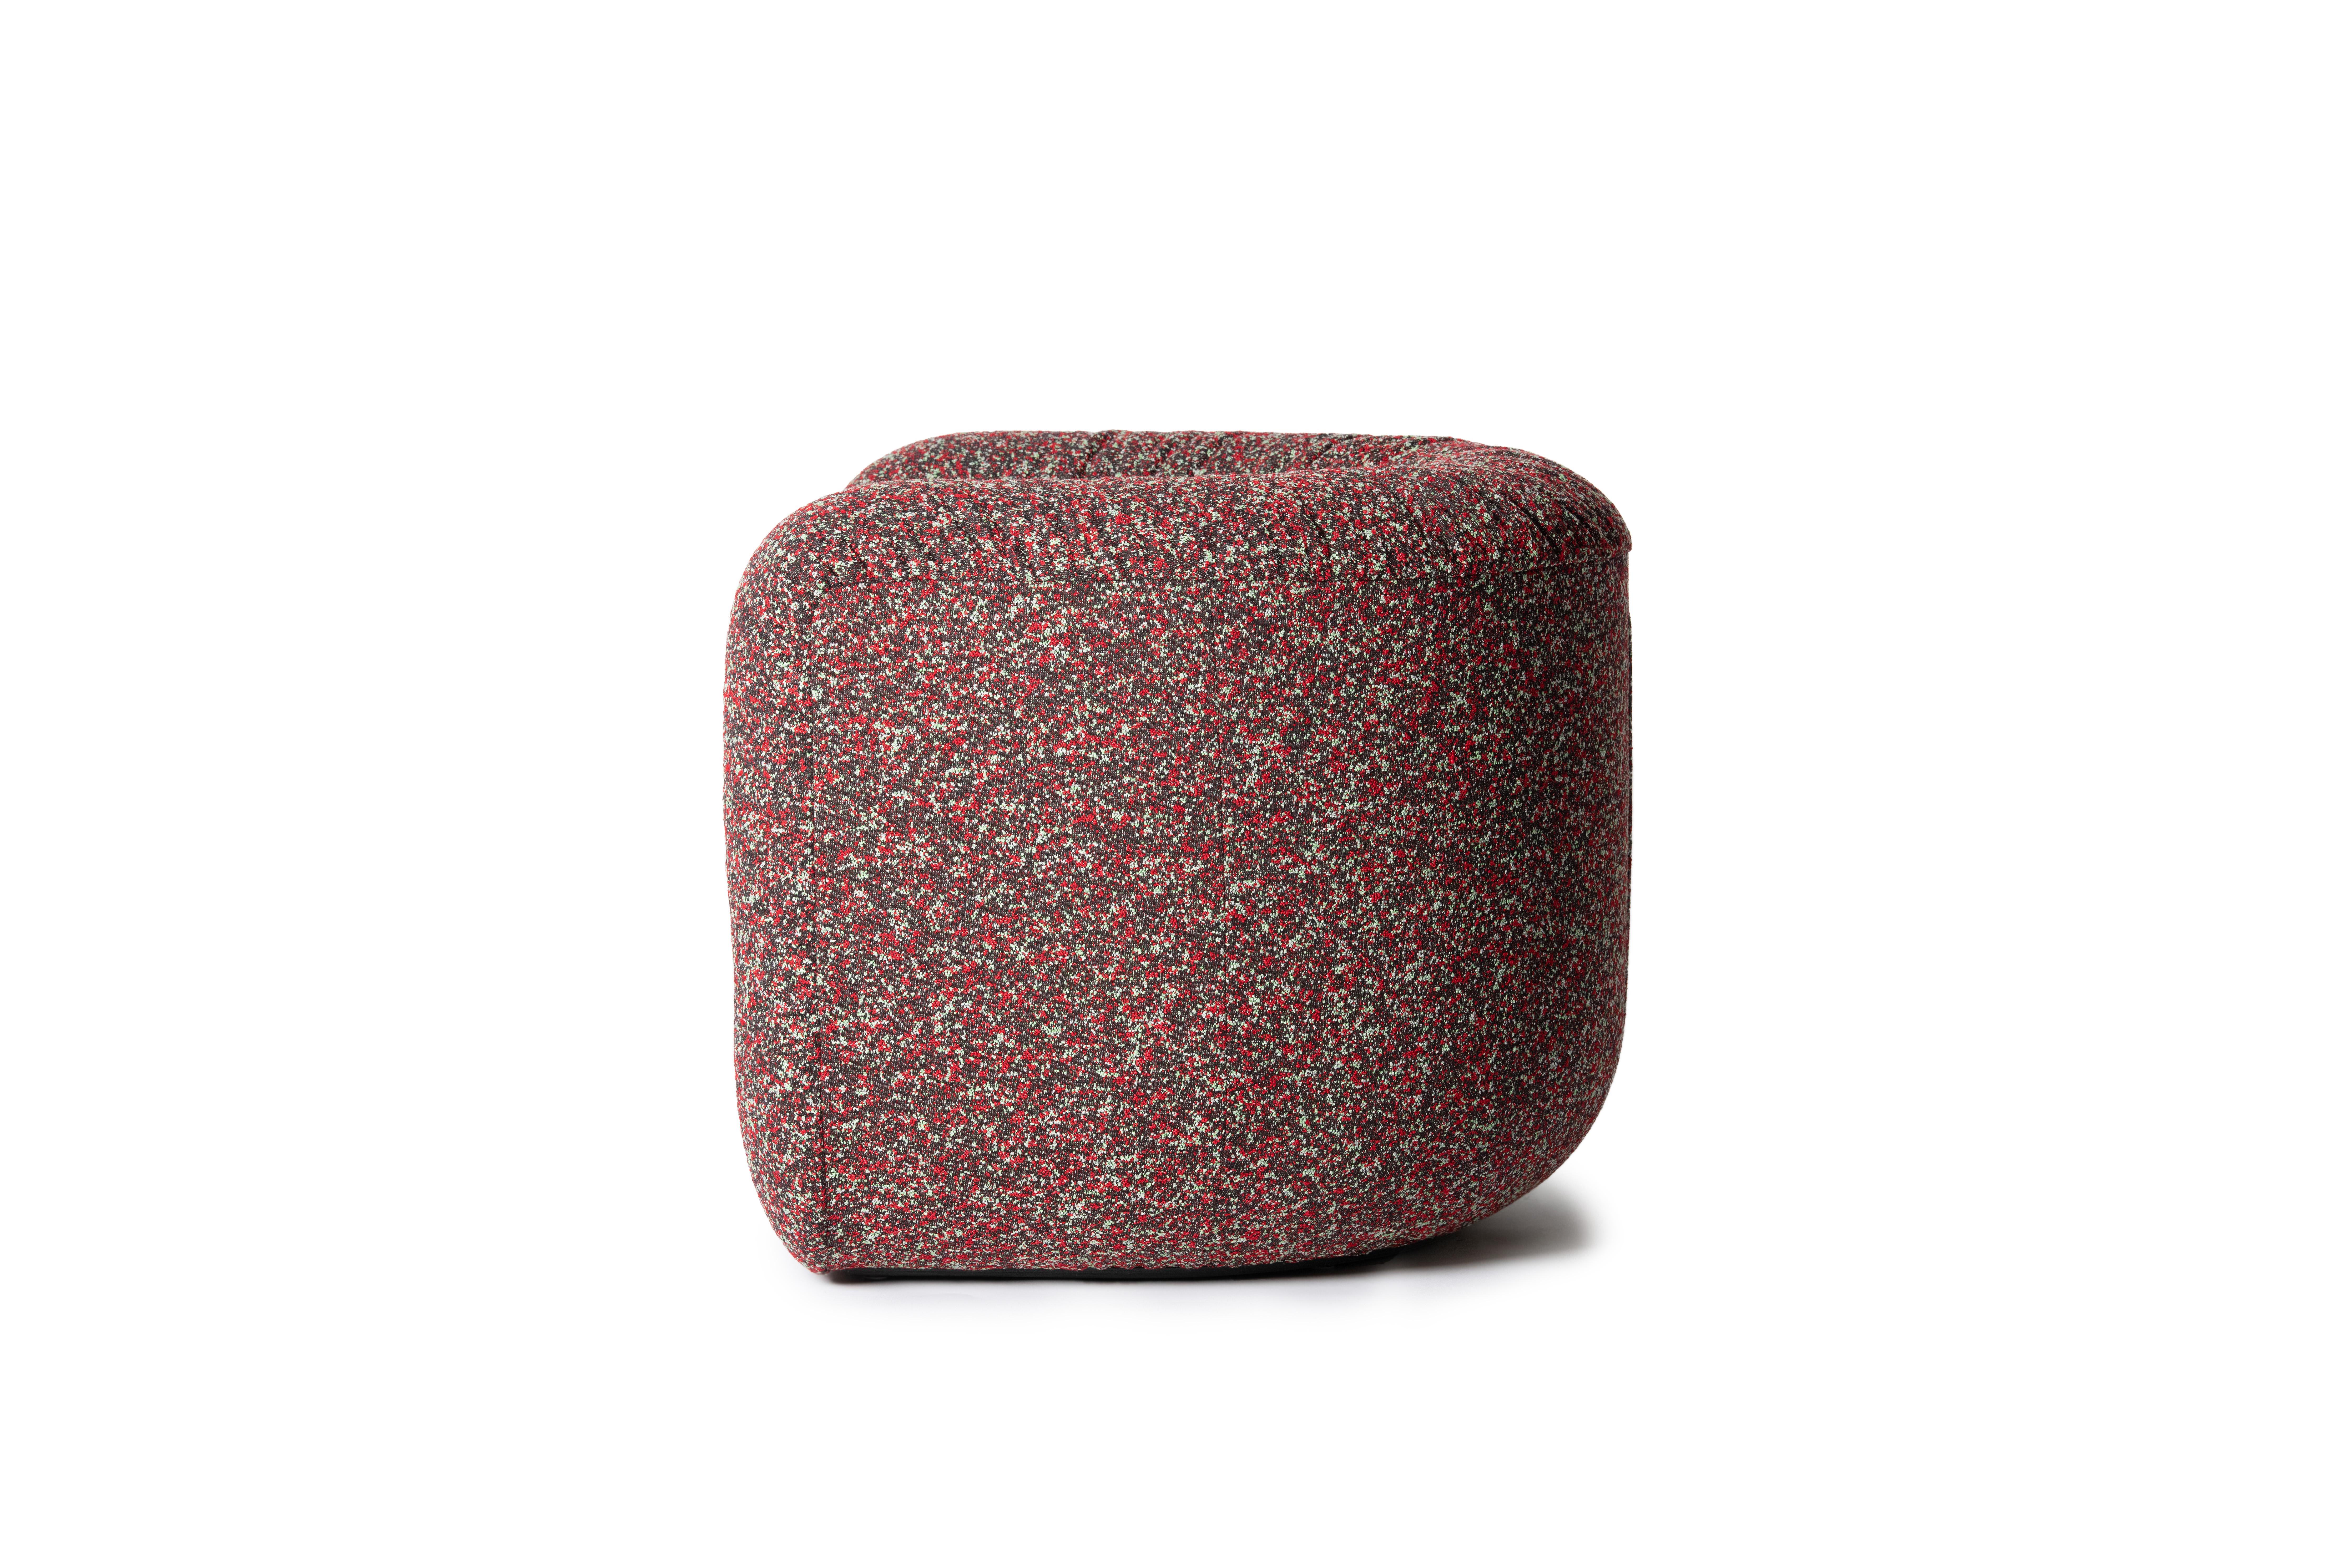 Swiss De Sede DS-707 Armchair in Atom Kvadrat Upholstery by Philippe Malouin For Sale